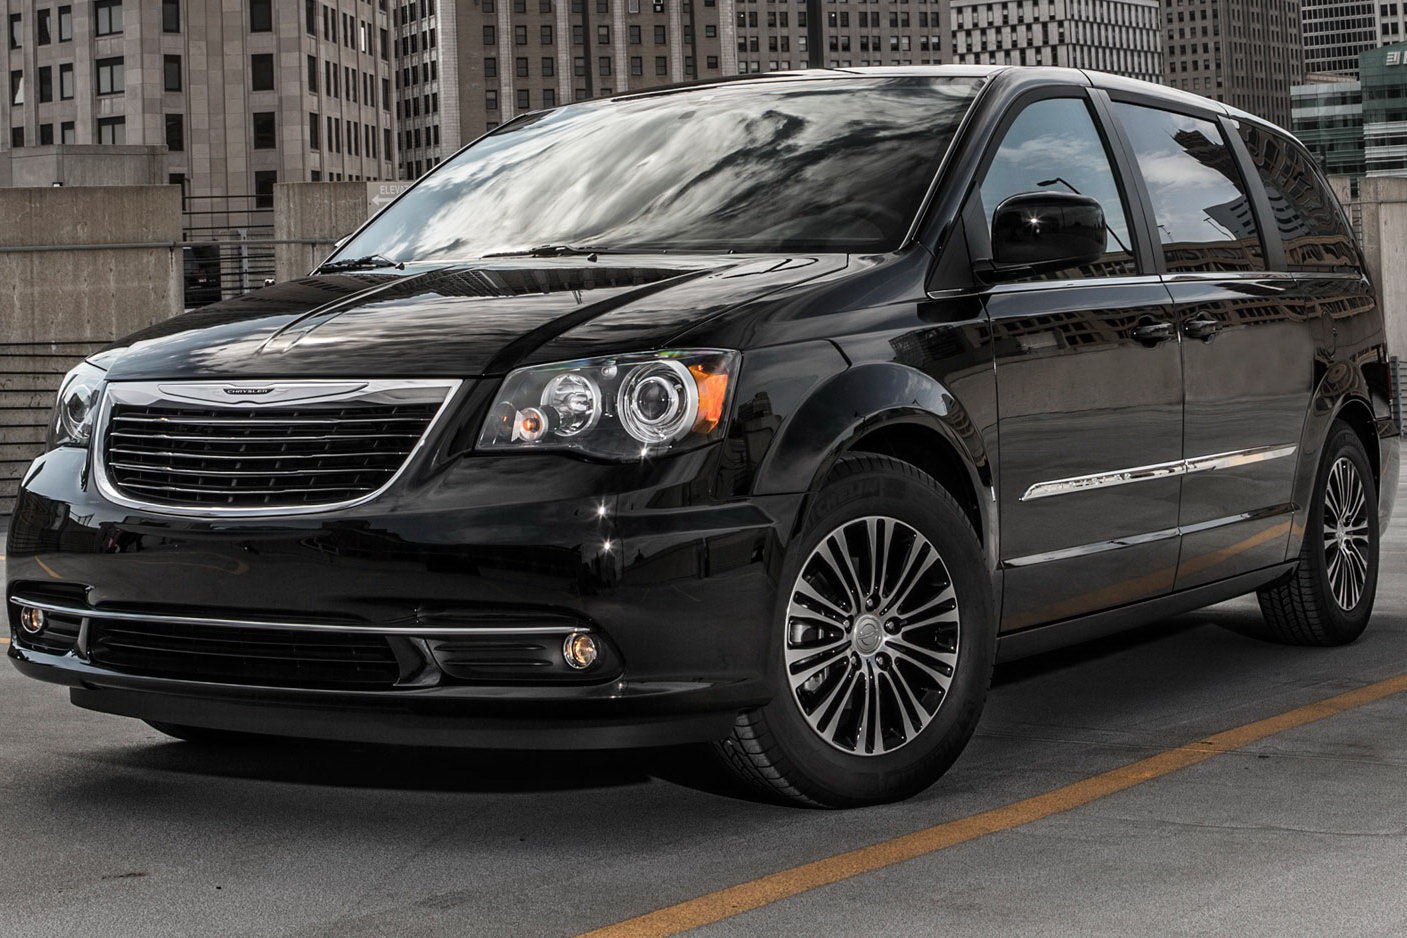 Chrysler town and country new model